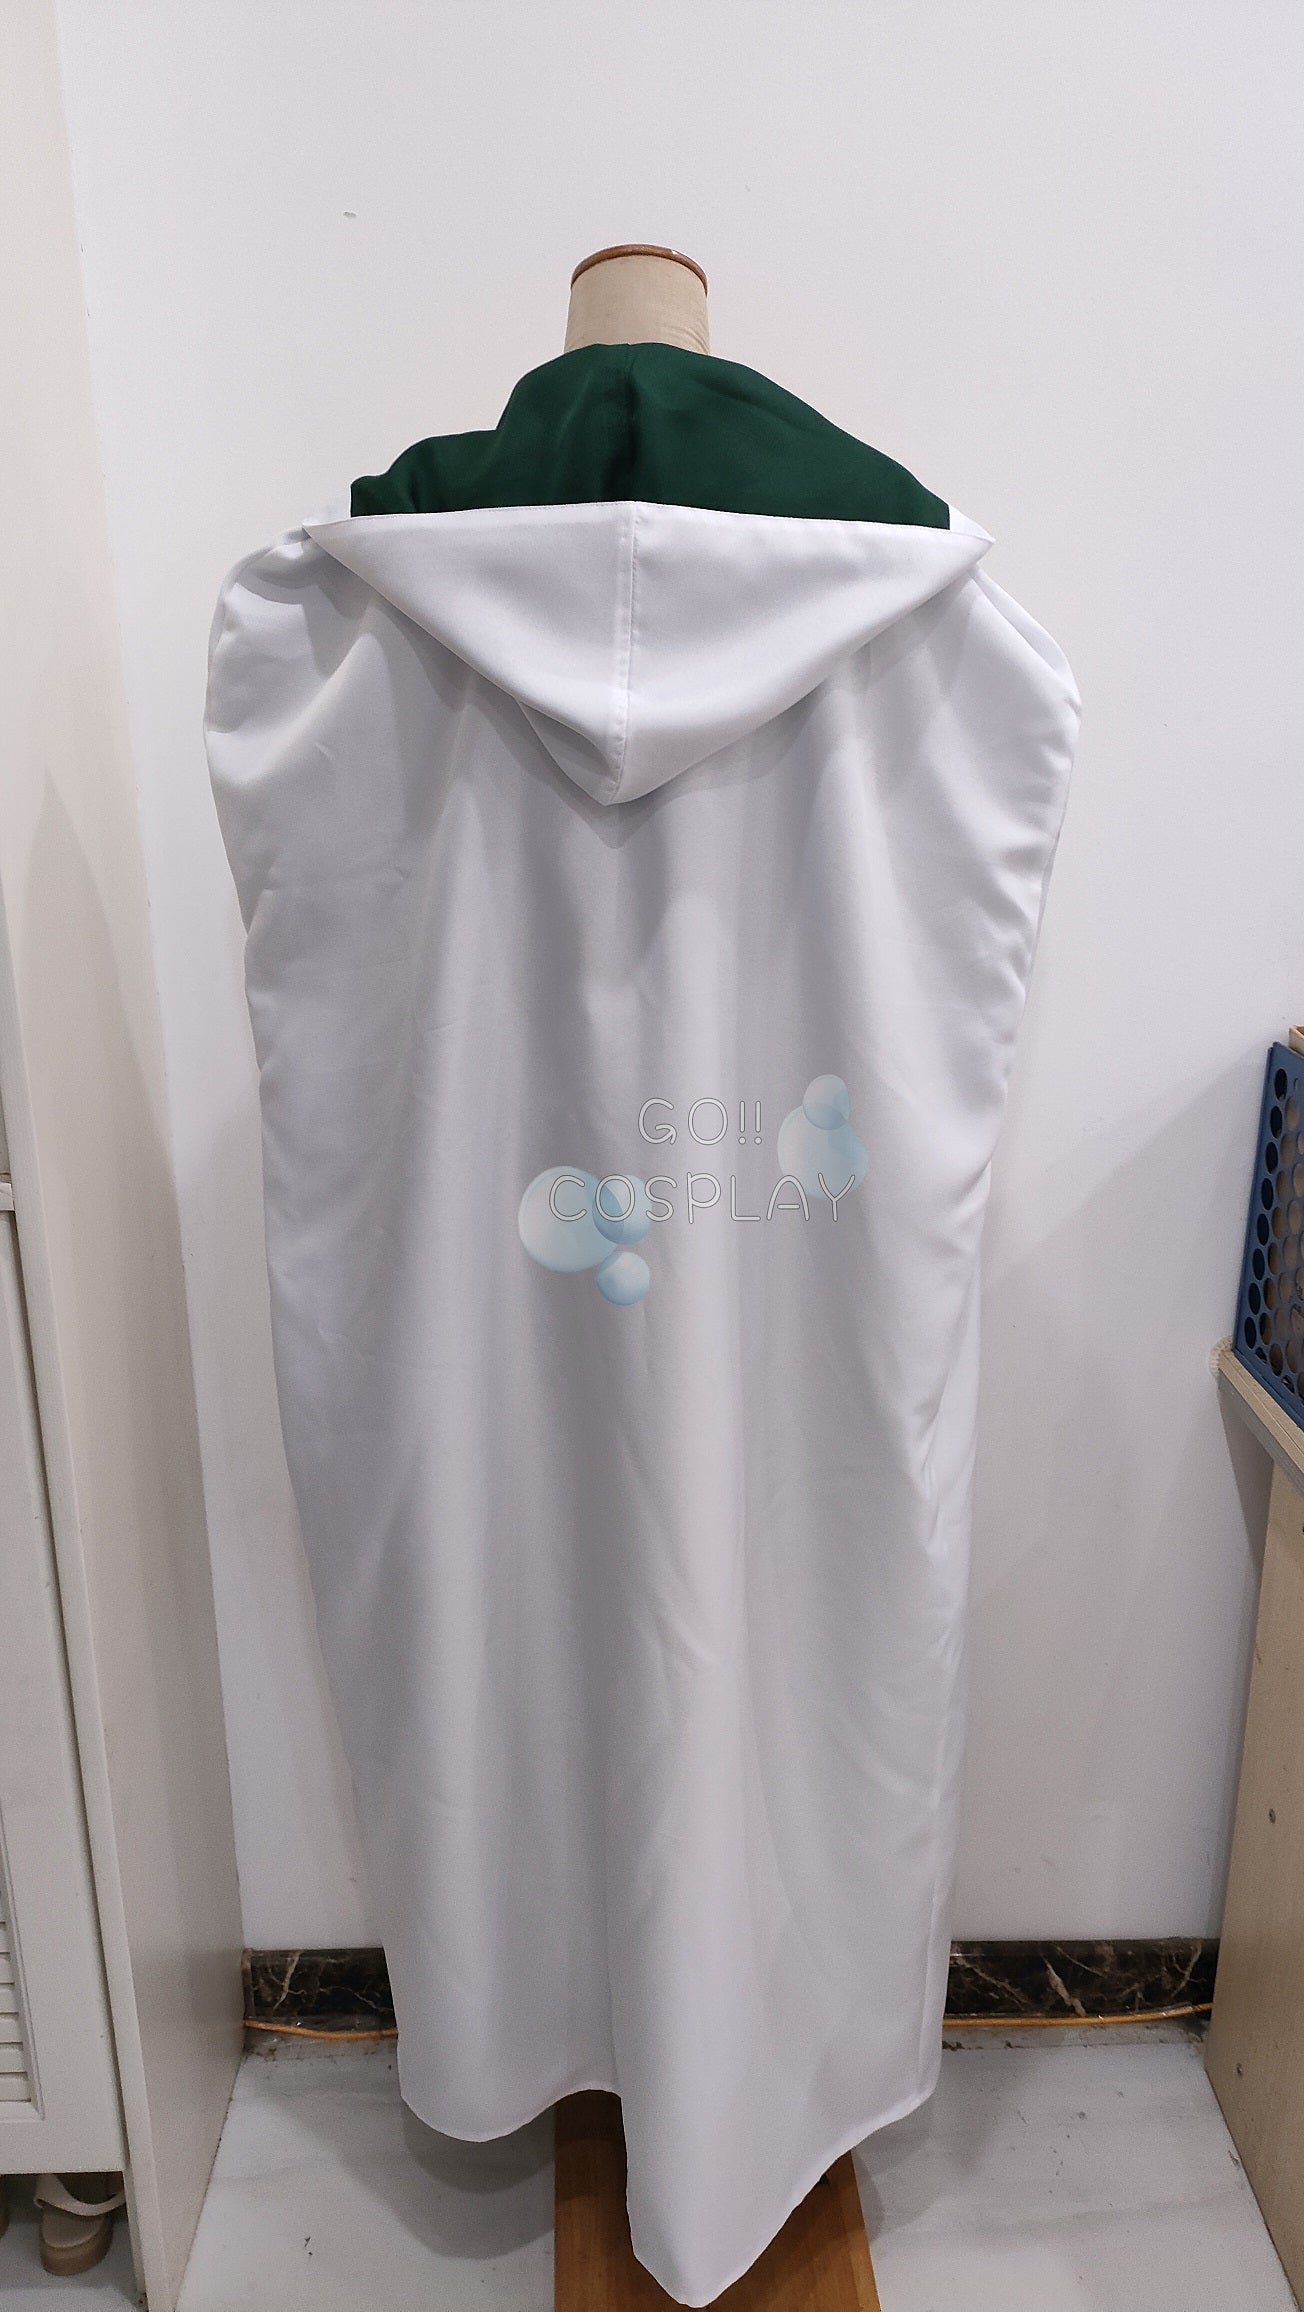 Rayleigh One Piece Costume for Sale